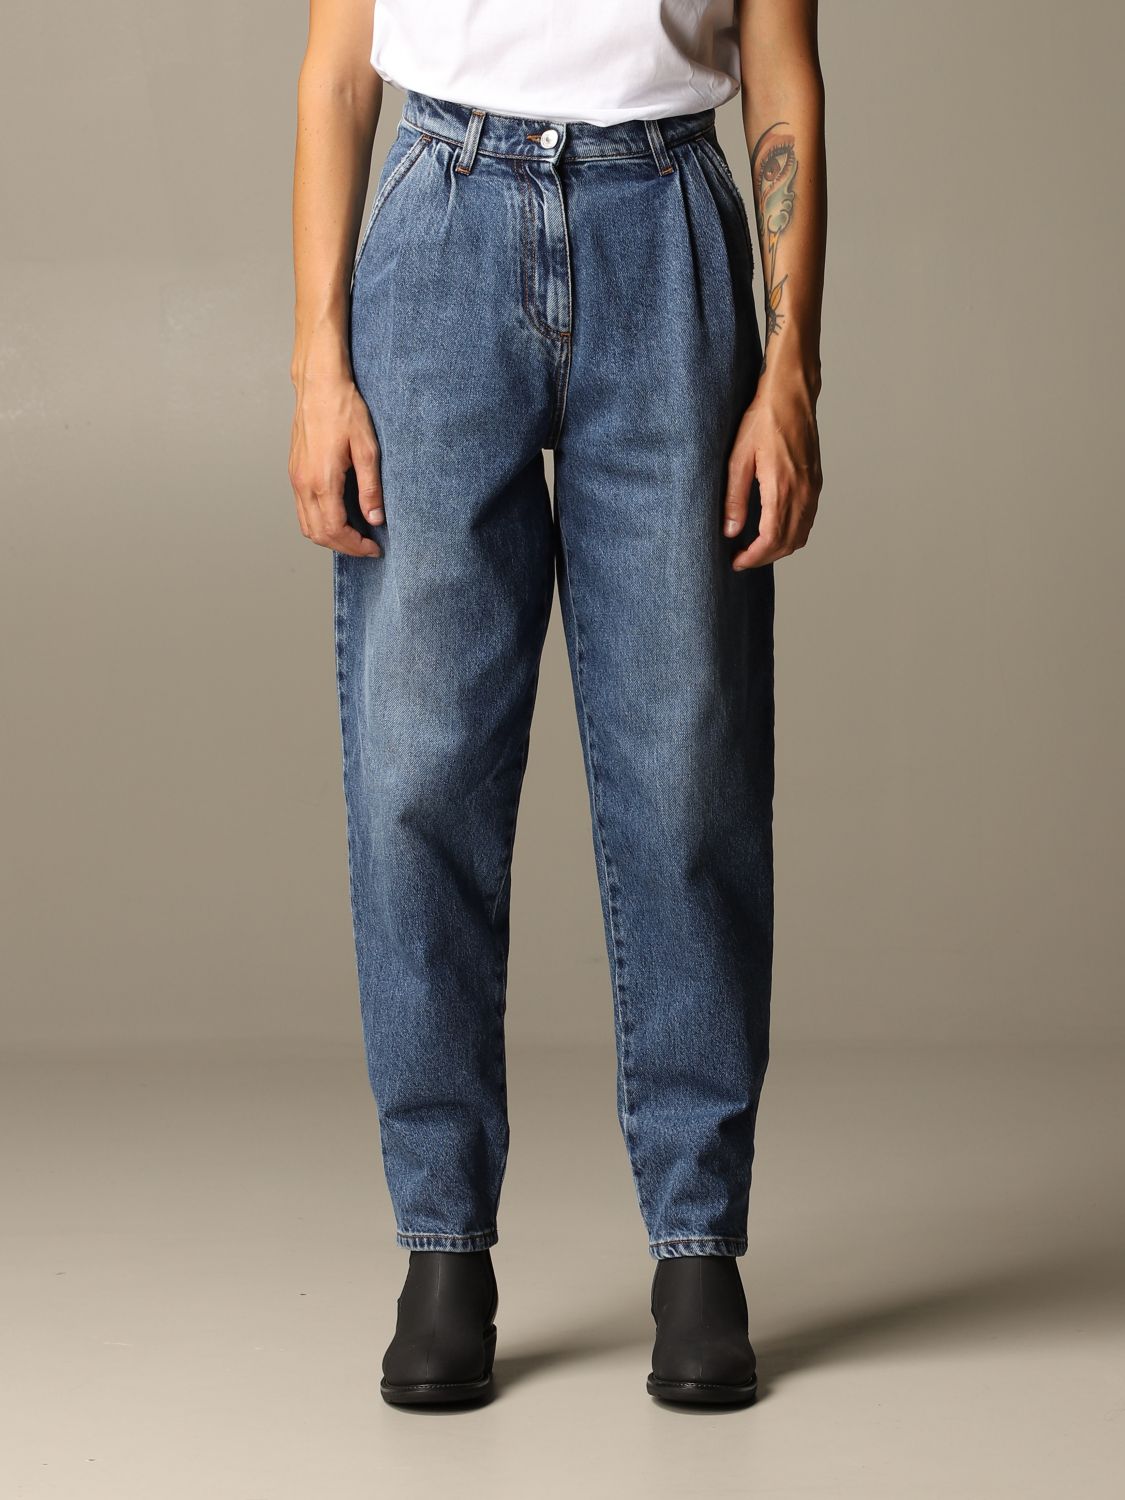 Msgm jeans in used denim with high waist